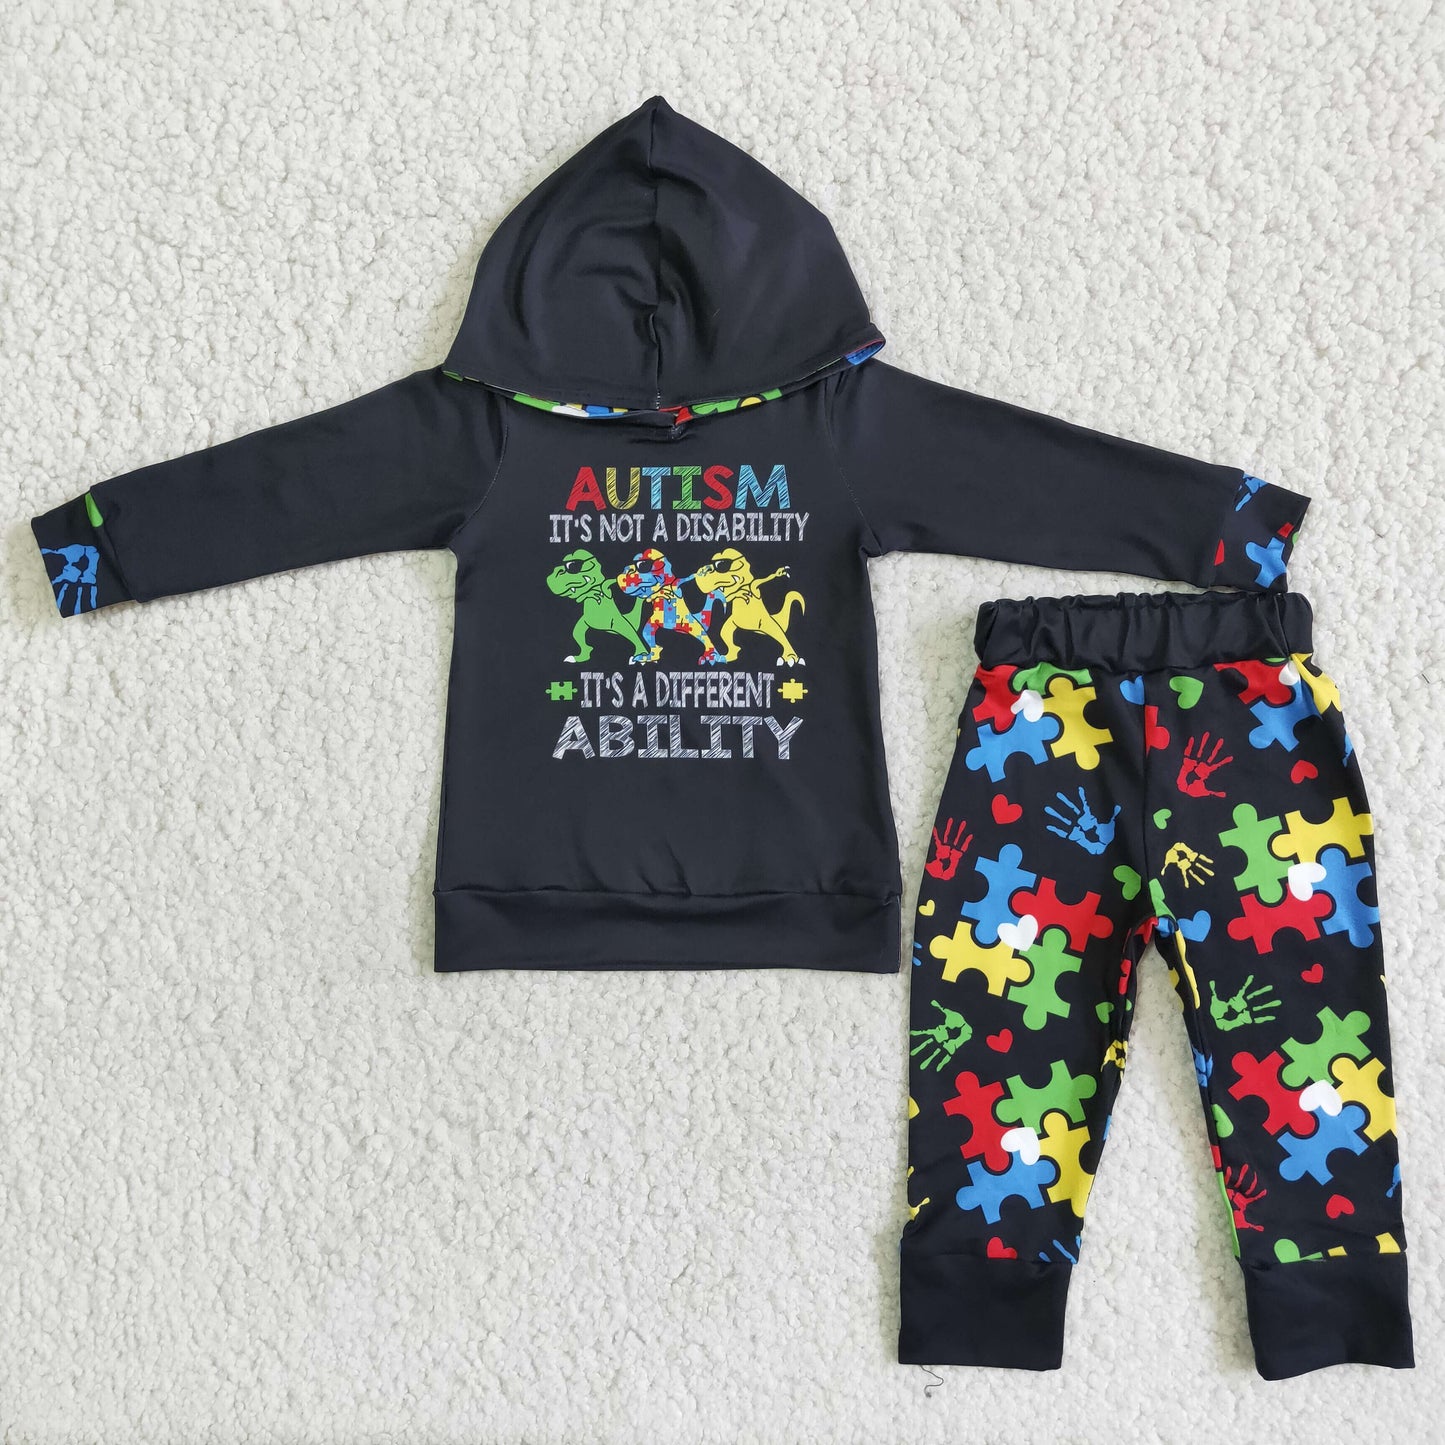 Autism is not a disability it's a different ability boy hoodie set